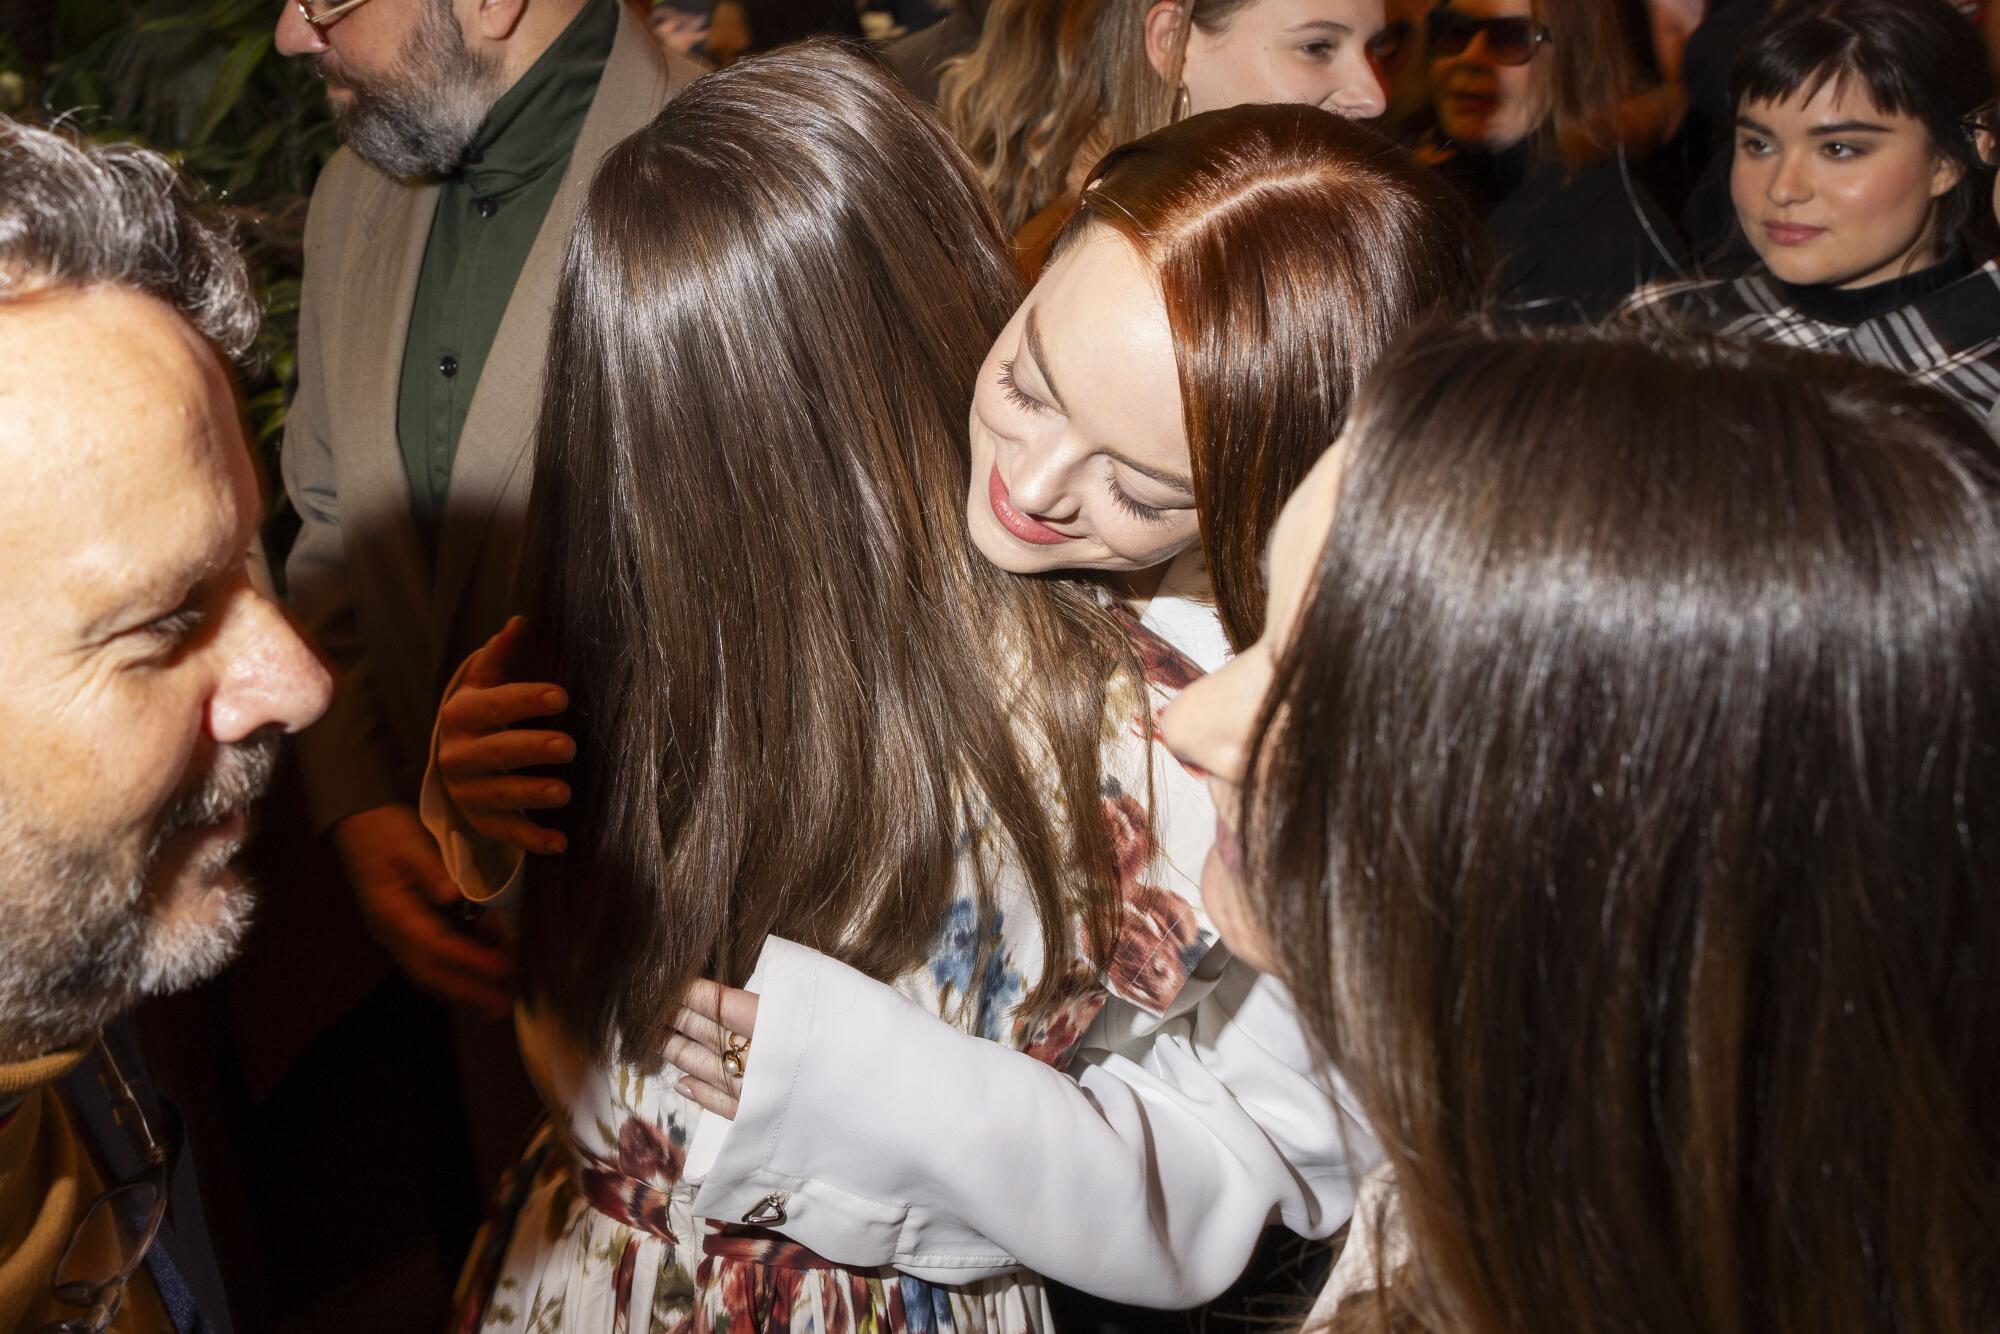 Two women with long straight hair embrace among a crowd of people.